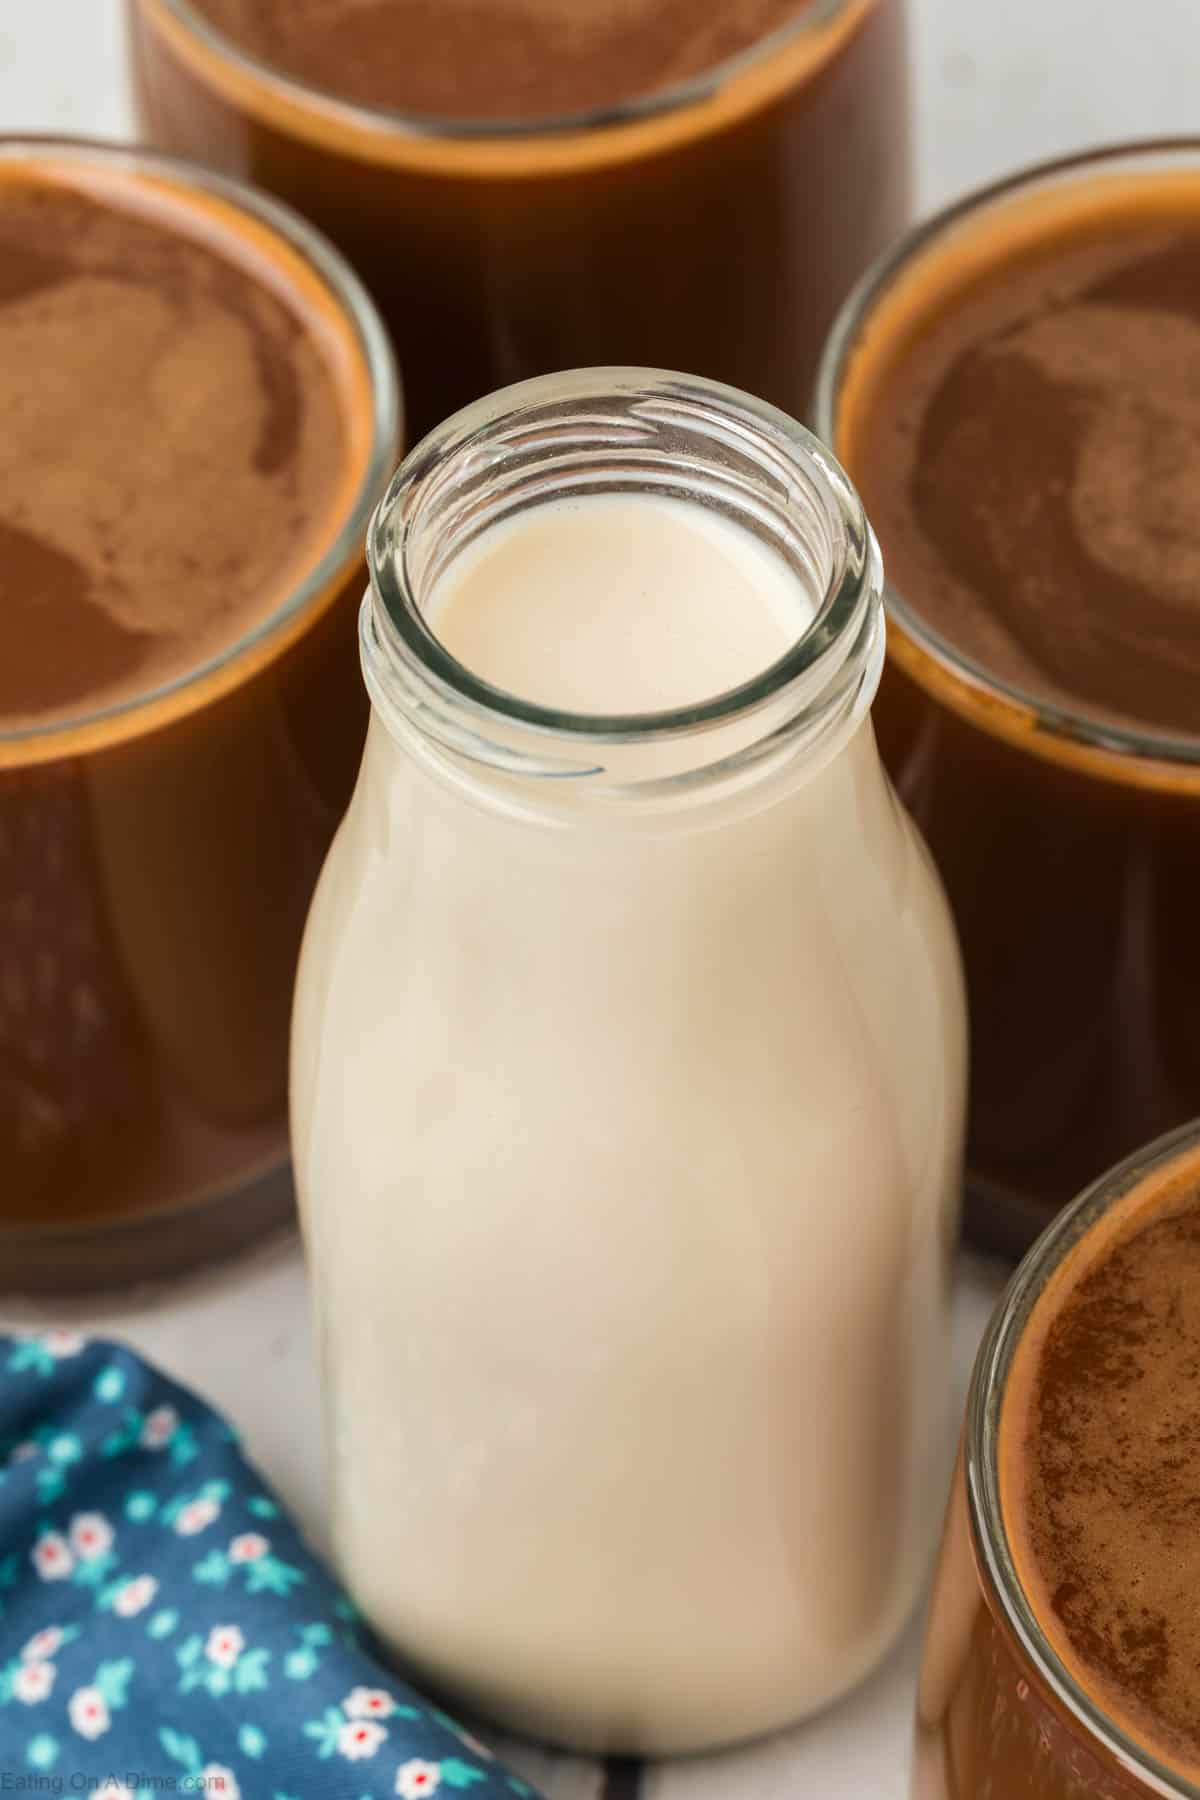 A glass bottle filled with milk, resembling a homemade coffee creamer, is surrounded by several mugs of coffee. The bottle is centrally positioned, contrasting against the dark liquid in the mugs. A blue cloth with a floral pattern is partially visible at the bottom left corner.